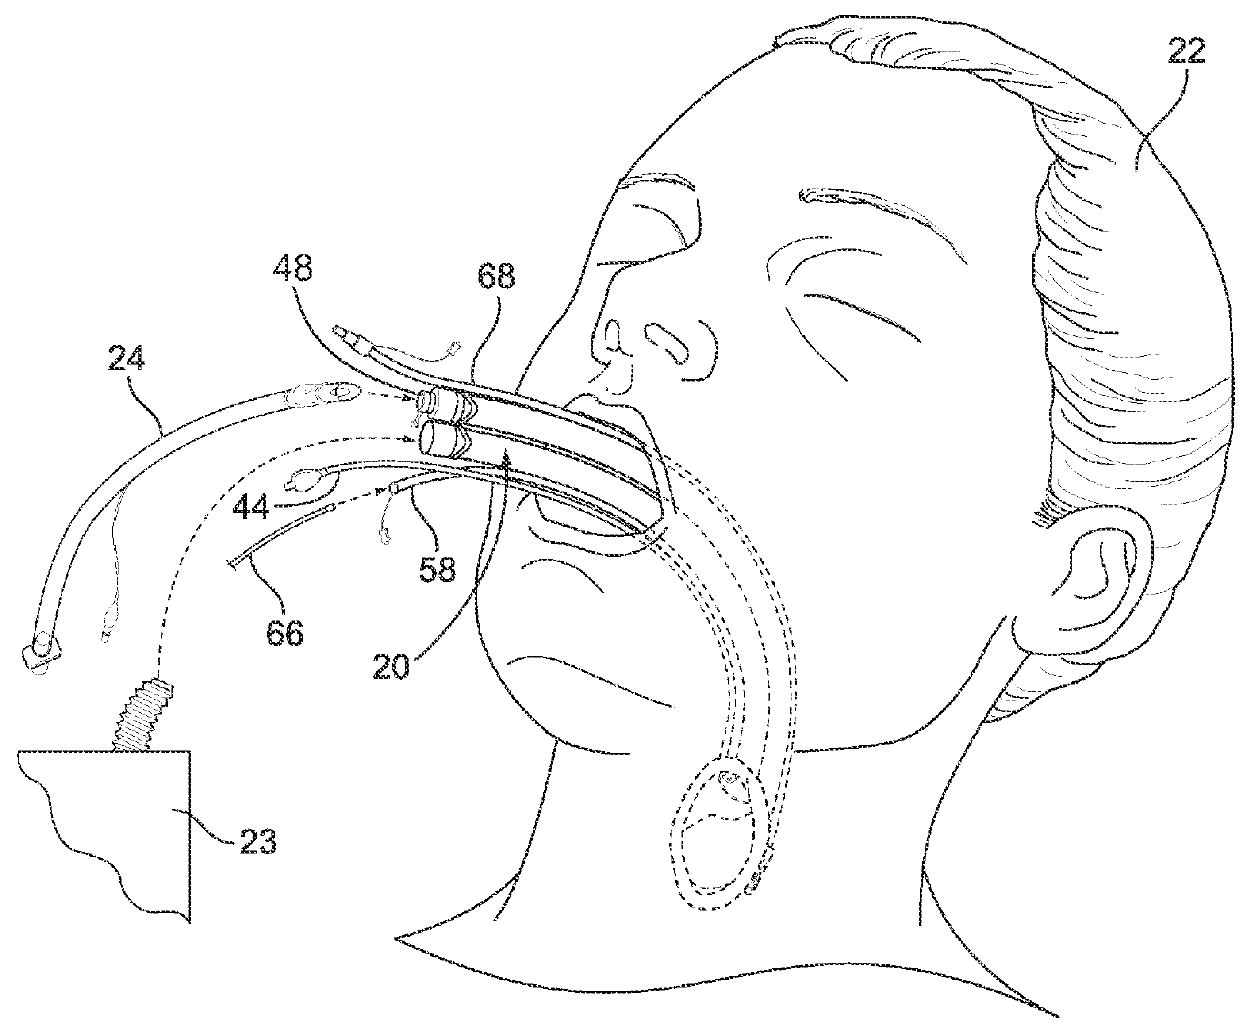 Airway device, airway assist device and the method of using same